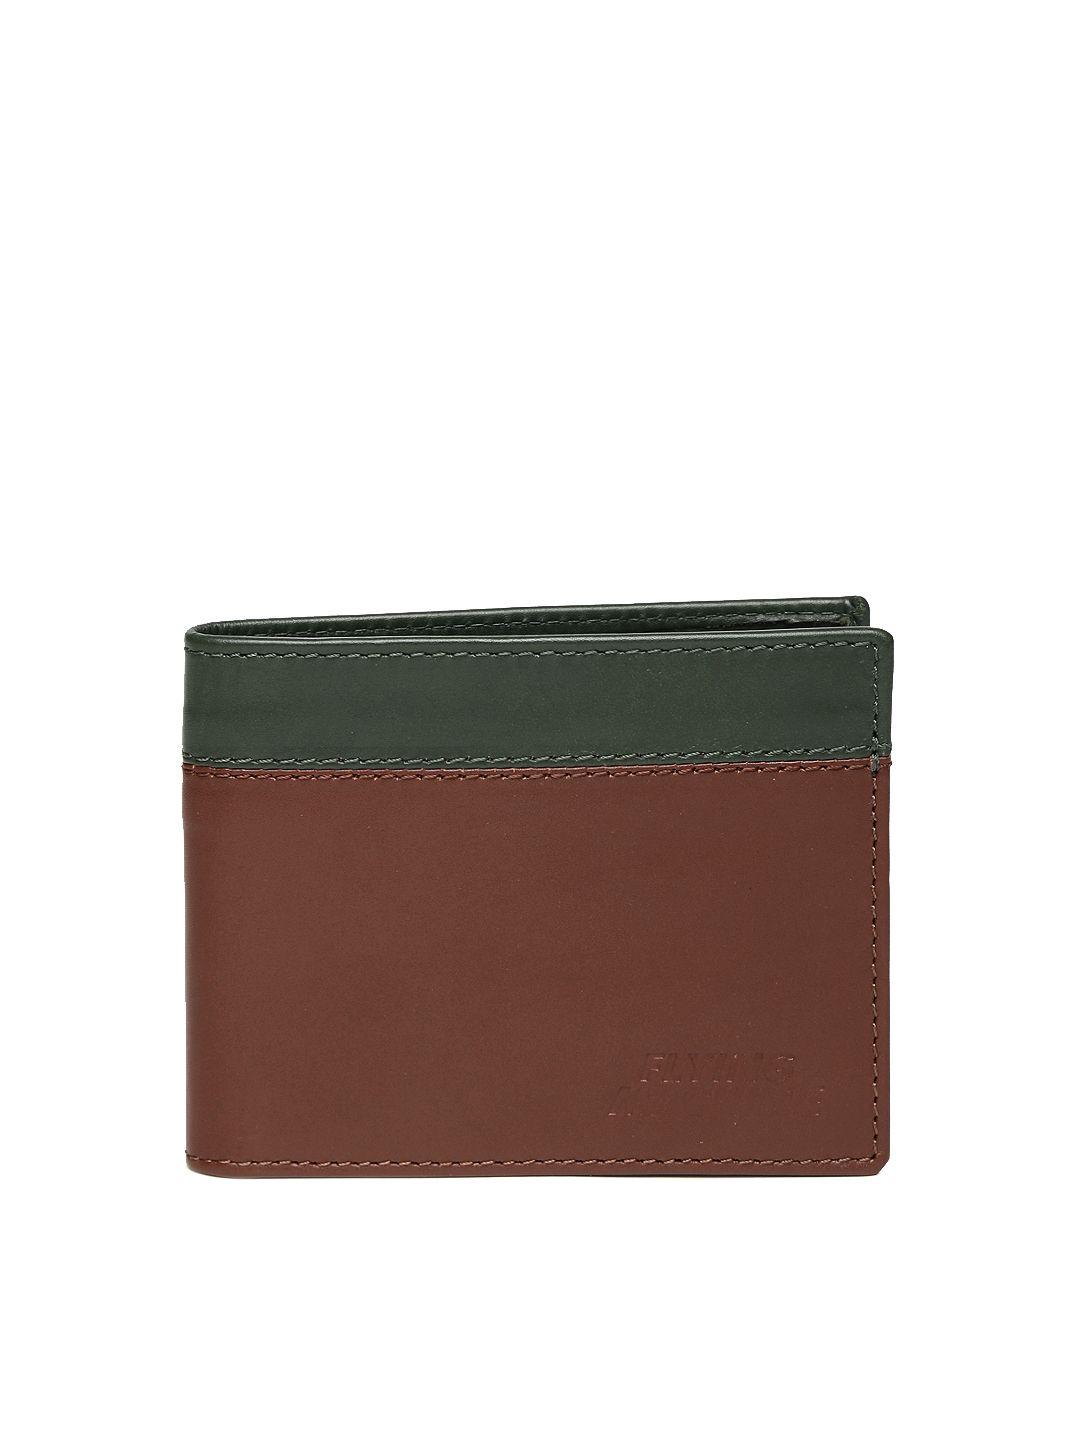 flying-machine-men-brown-&-green-two-fold-leather-card-holder